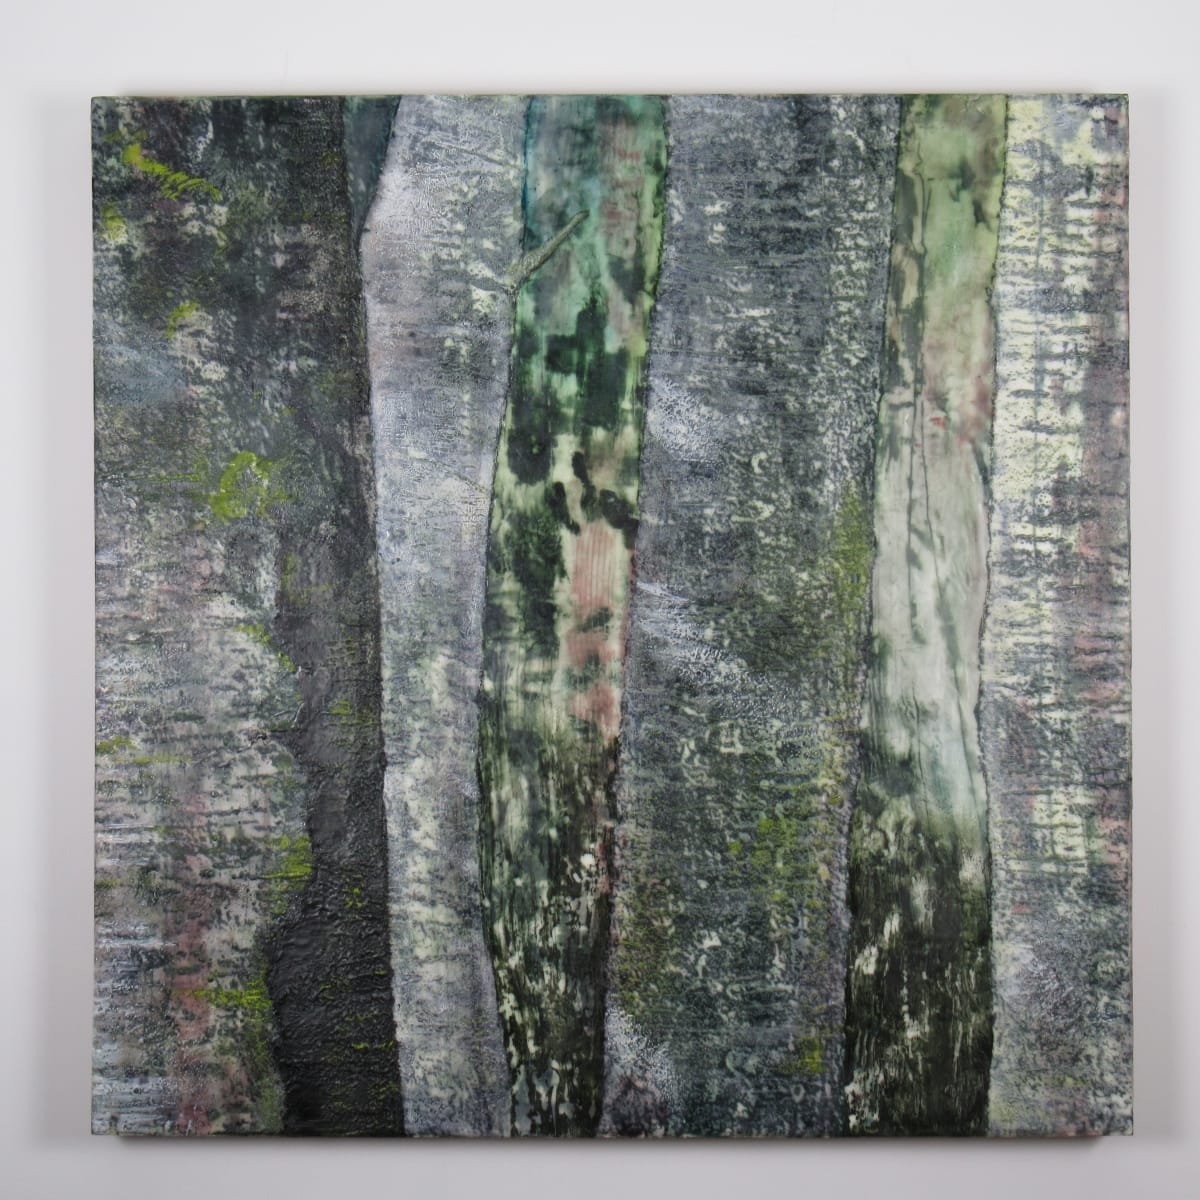 Sighing Forest 2021  Image: Sighing Forest 2021 photo encaustic 36" x 36"